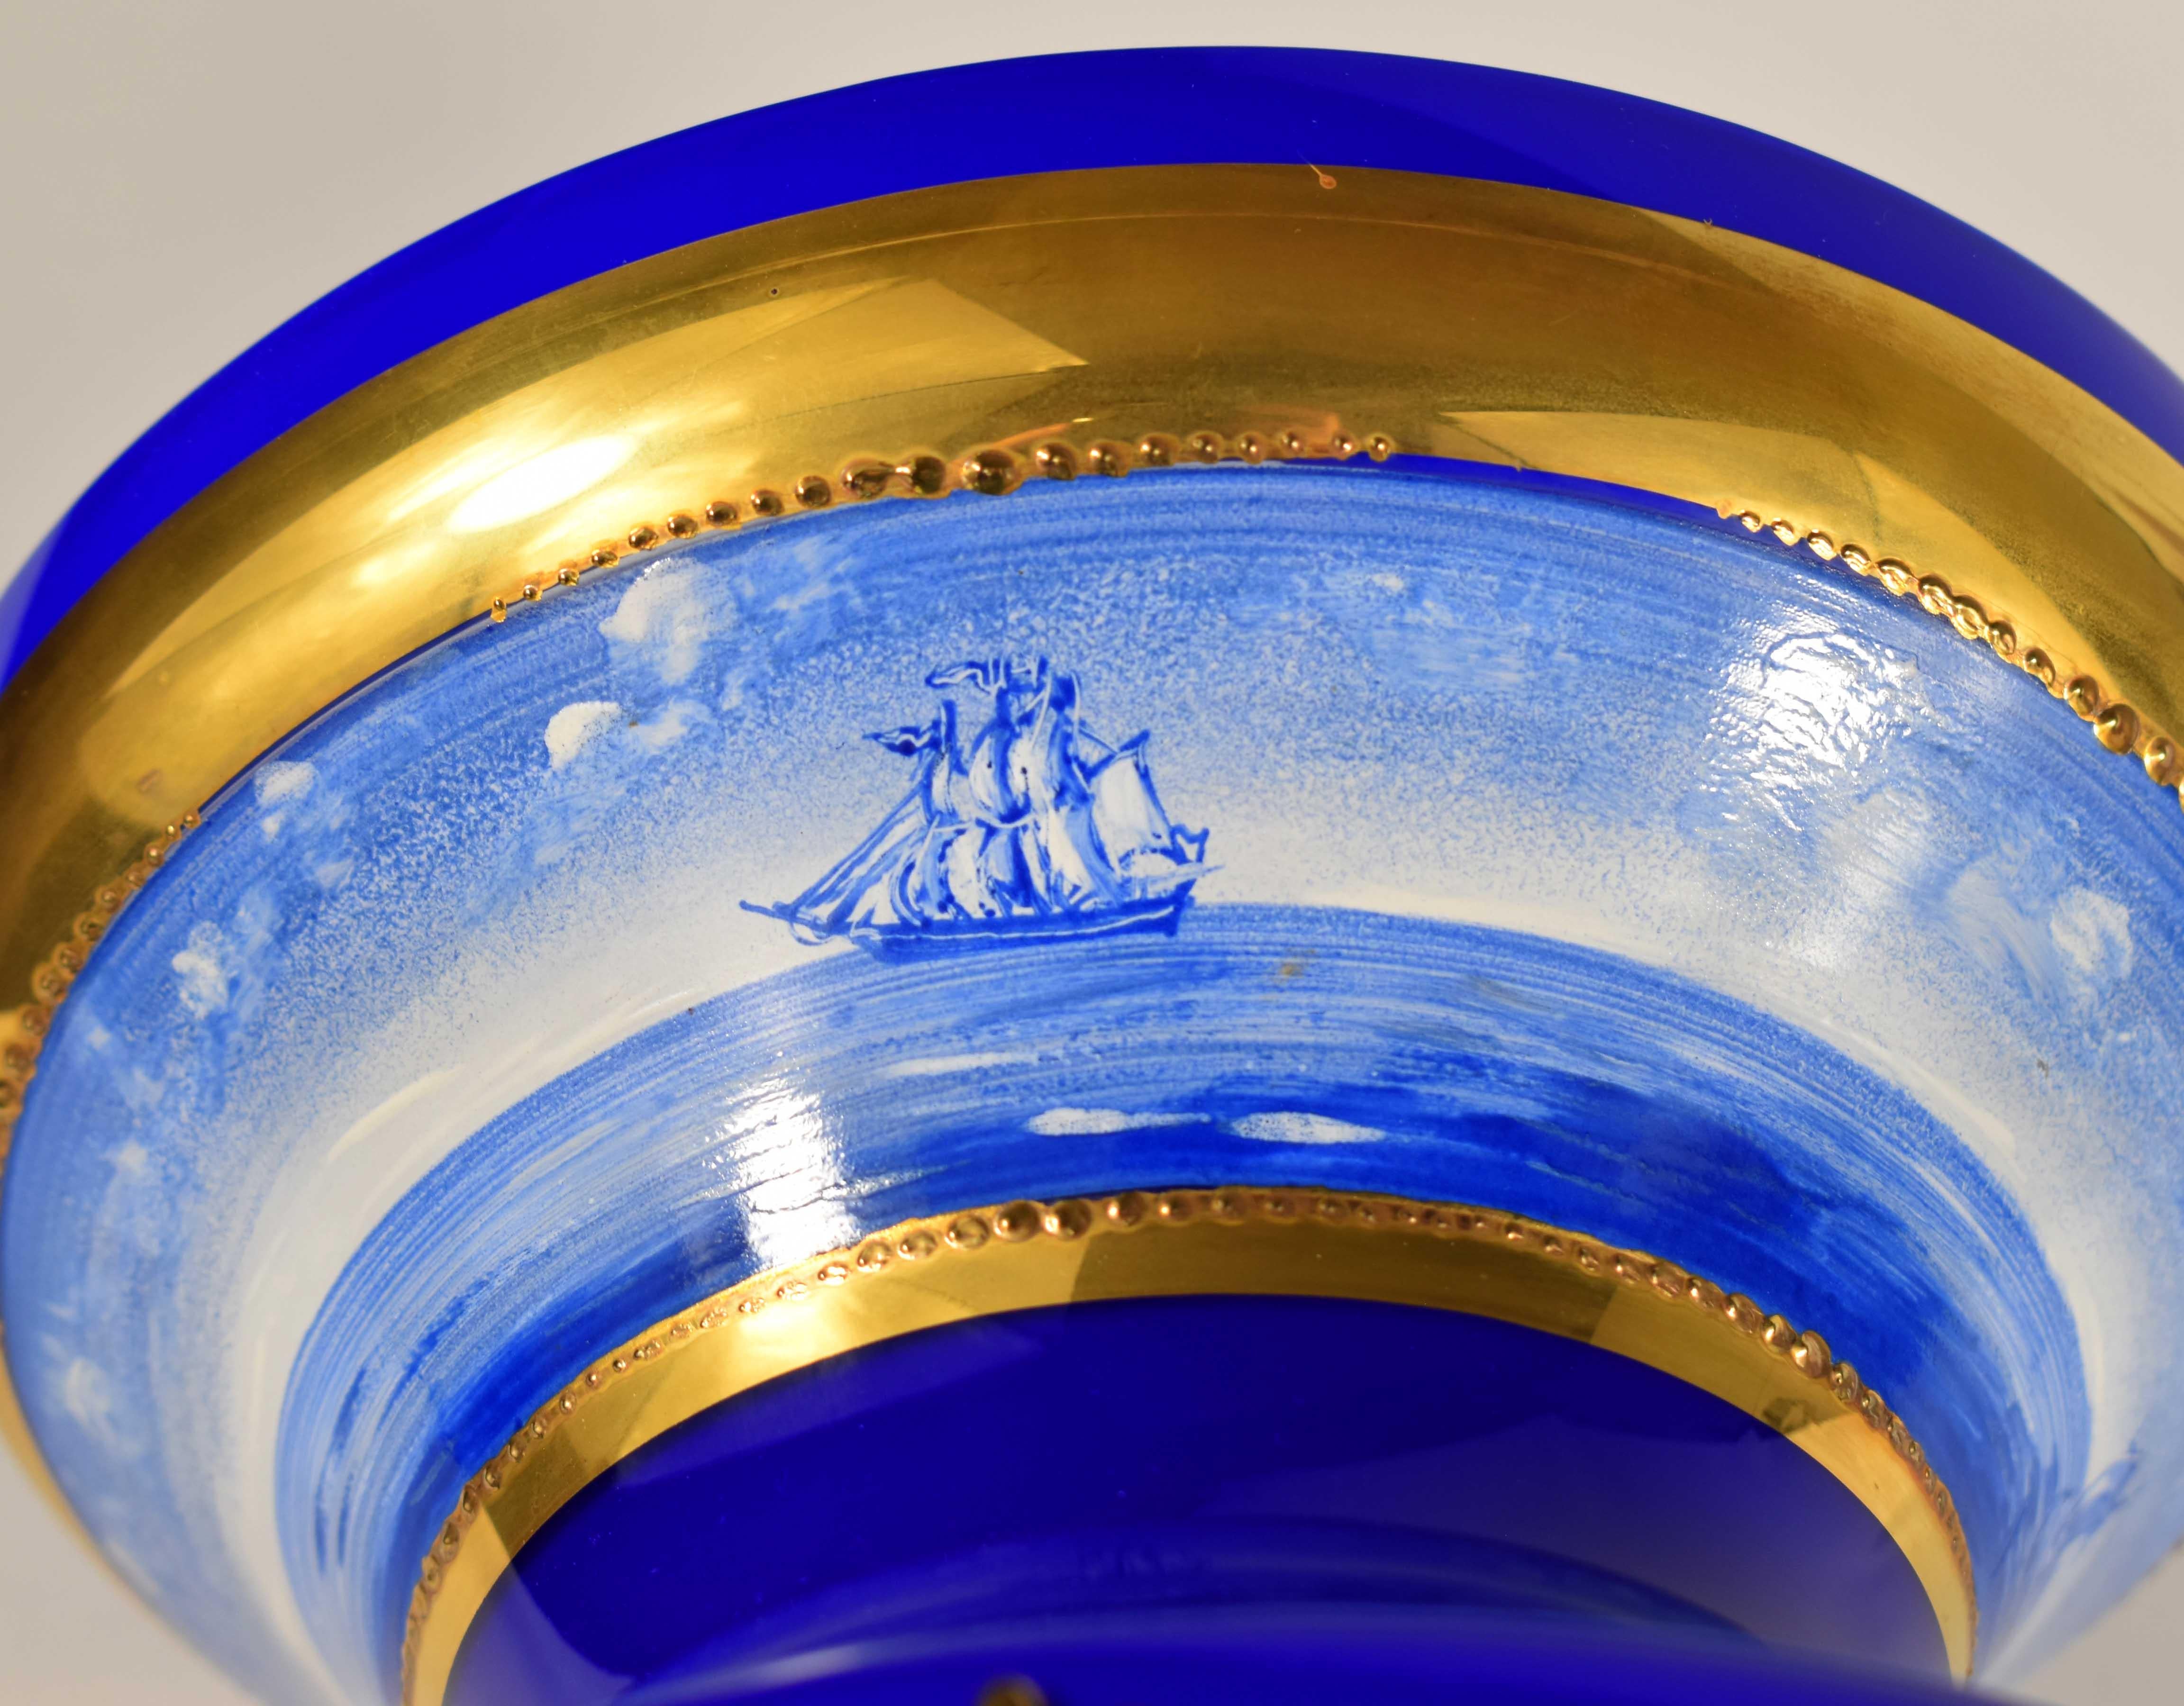 Large Opal Vase Overlay Blue Cobalt Glass, Painted Ships, Gilded, 20th Century For Sale 5